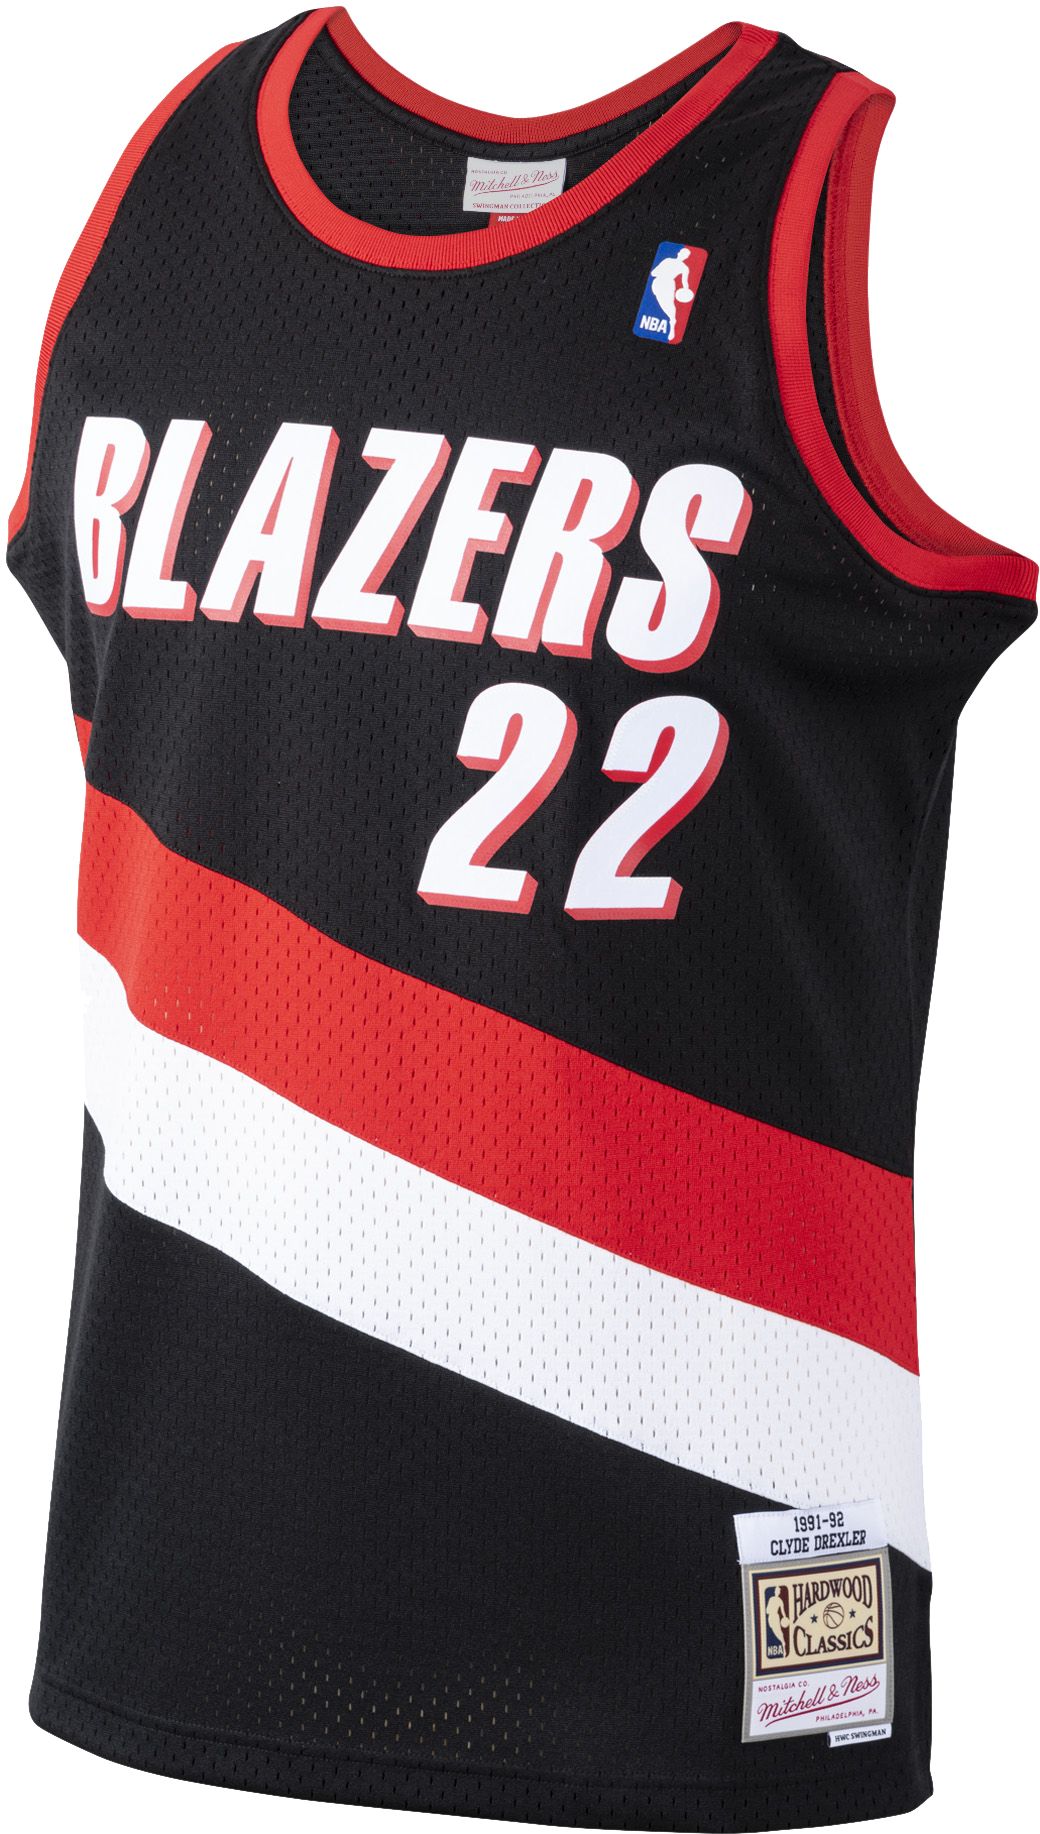 Clyde Drexler red and black jersey